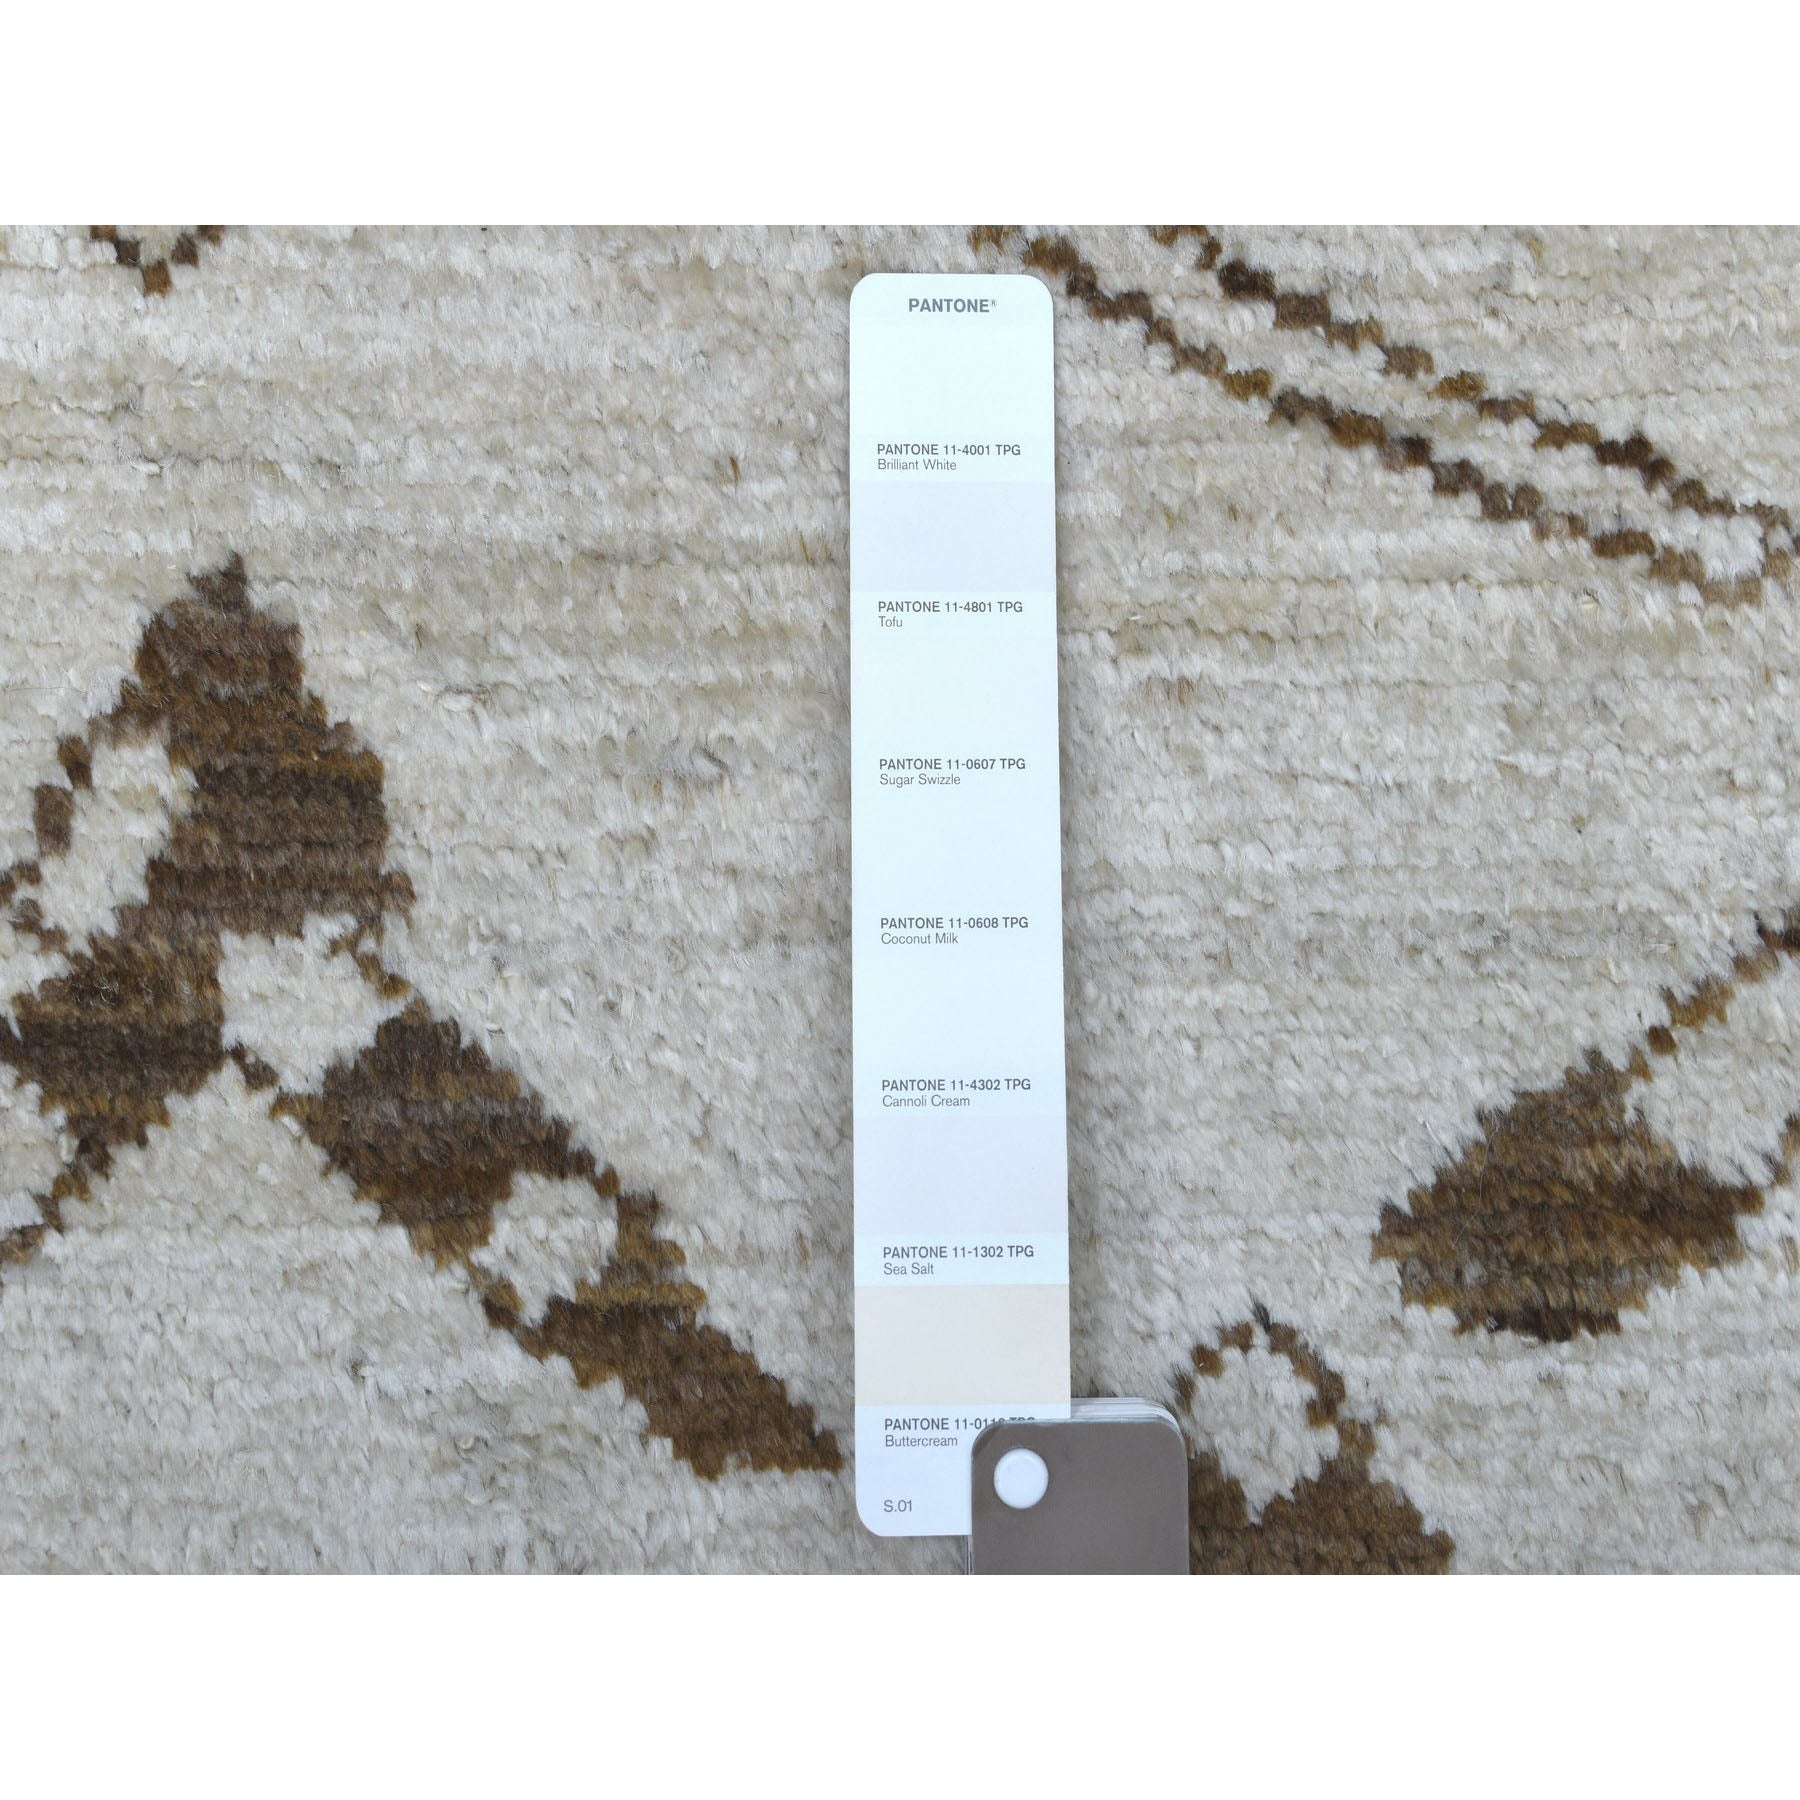 Hand Knotted Tribal Area Rug > Design# CCSR56494 > Size: 4'-0" x 5'-7"